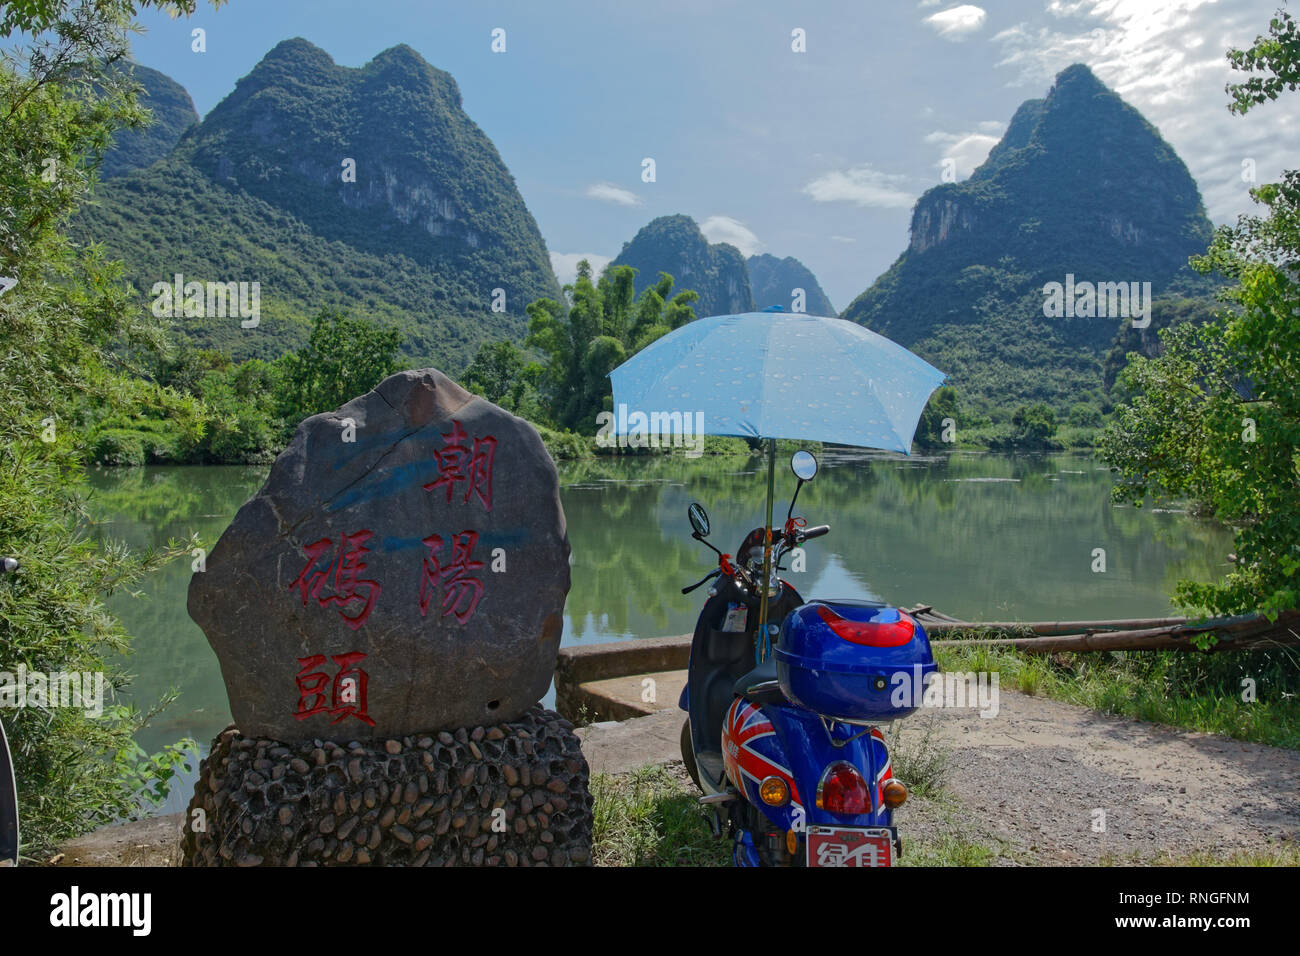 Electric Scooter in Guilin Mountains over looking lake Stock Photo